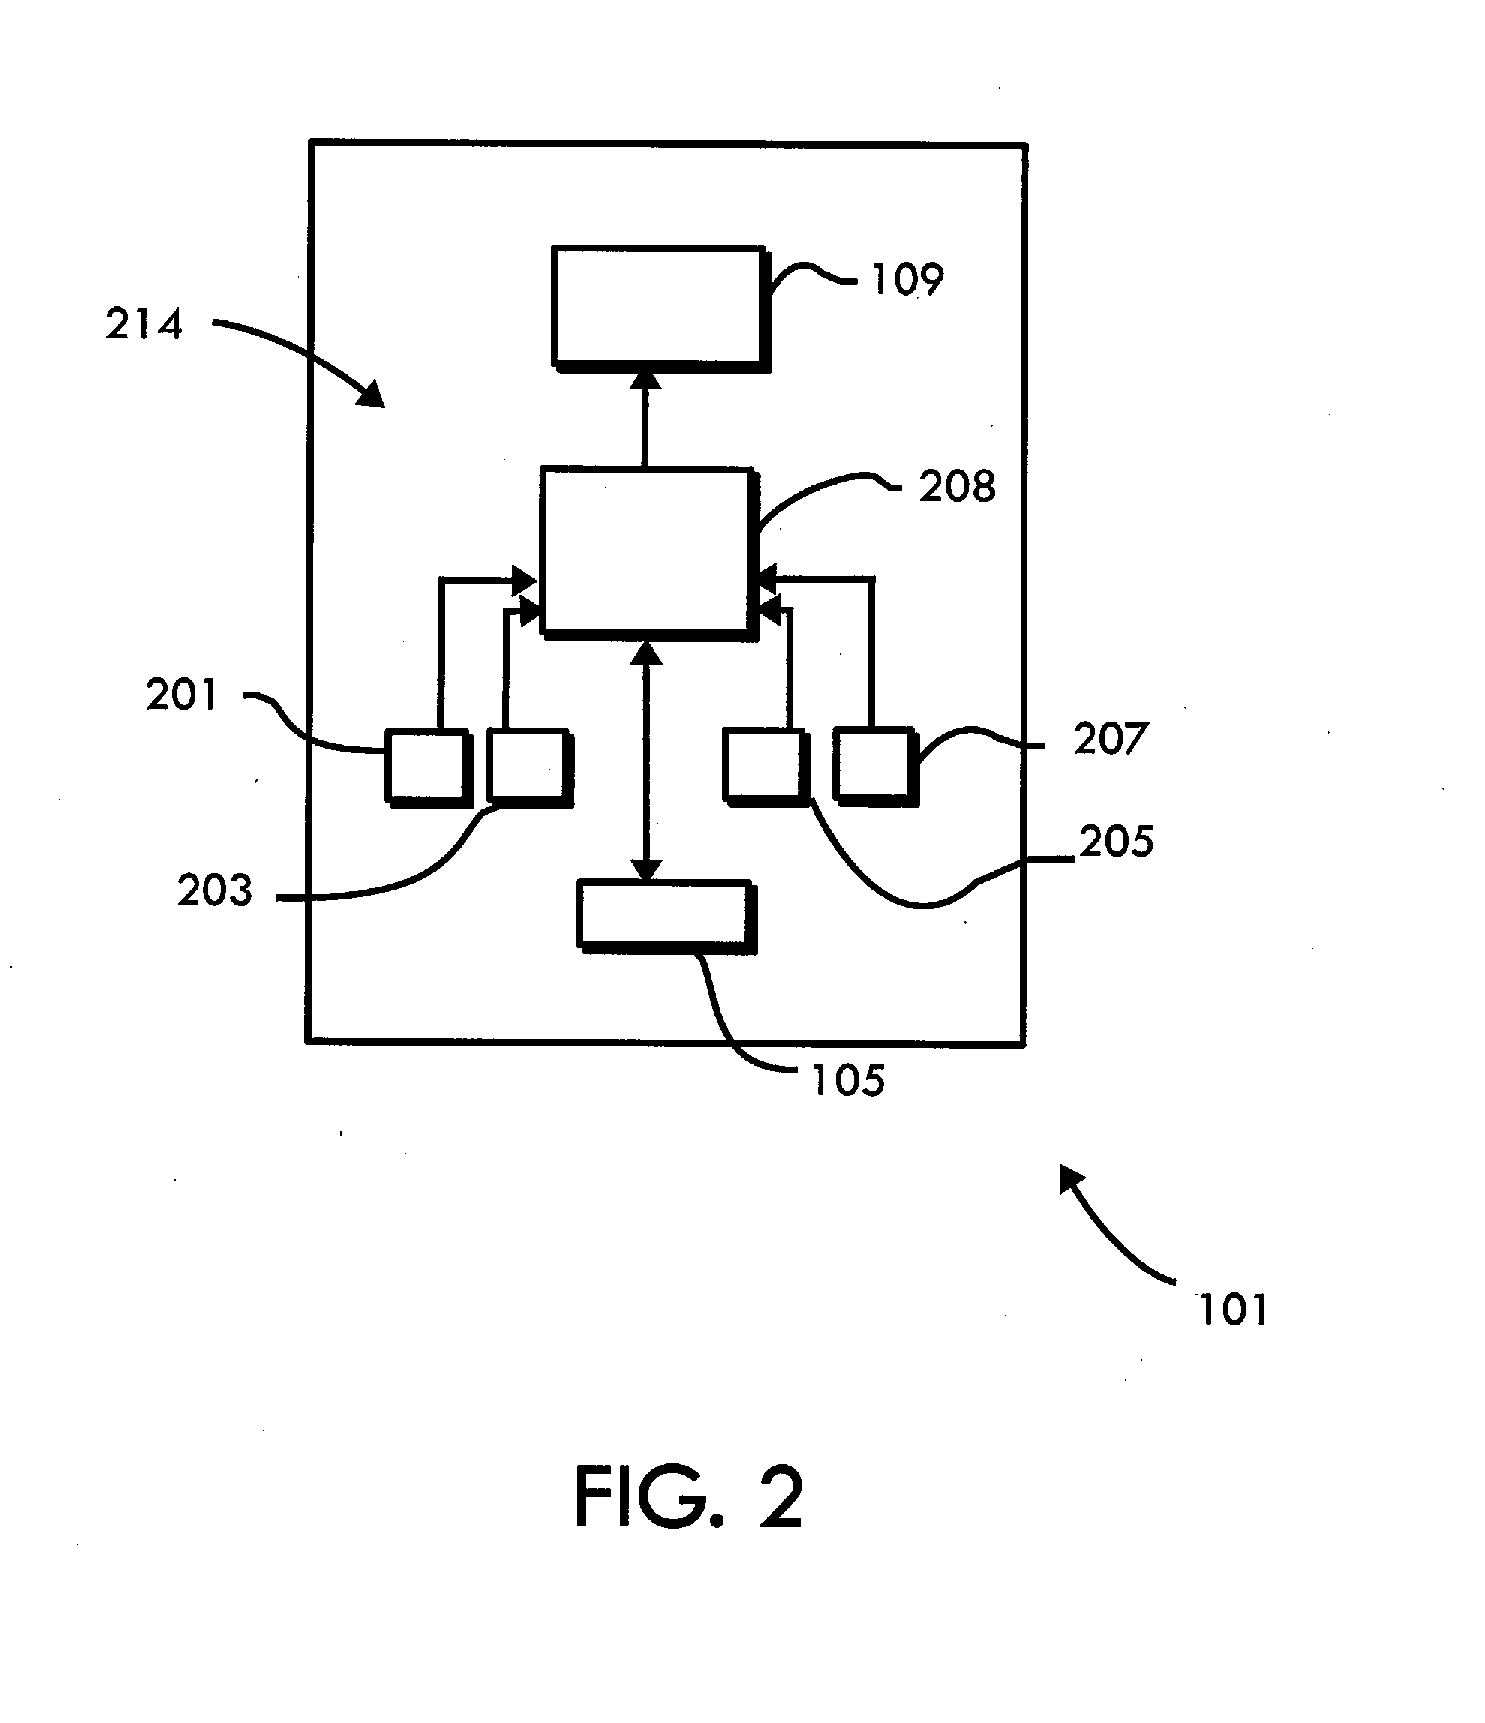 Removable Time Adjusting Device, System, and Method for Adjusting an Electronic Plumbing Controller